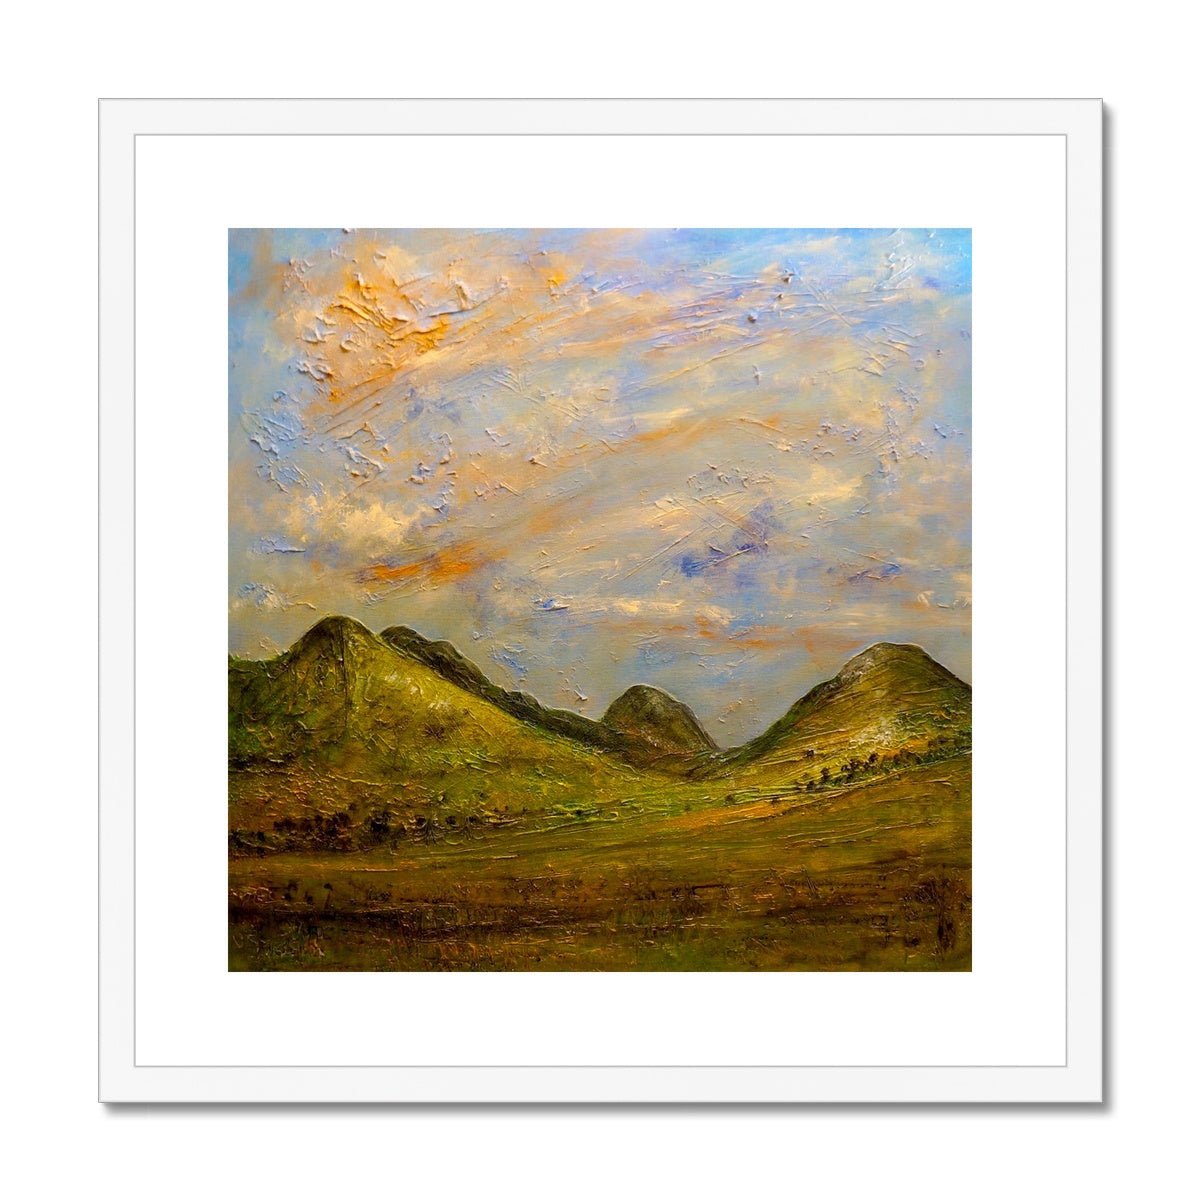 Glencoe Summer Painting | Framed & Mounted Prints From Scotland-Framed & Mounted Prints-Glencoe Art Gallery-20"x20"-White Frame-Paintings, Prints, Homeware, Art Gifts From Scotland By Scottish Artist Kevin Hunter